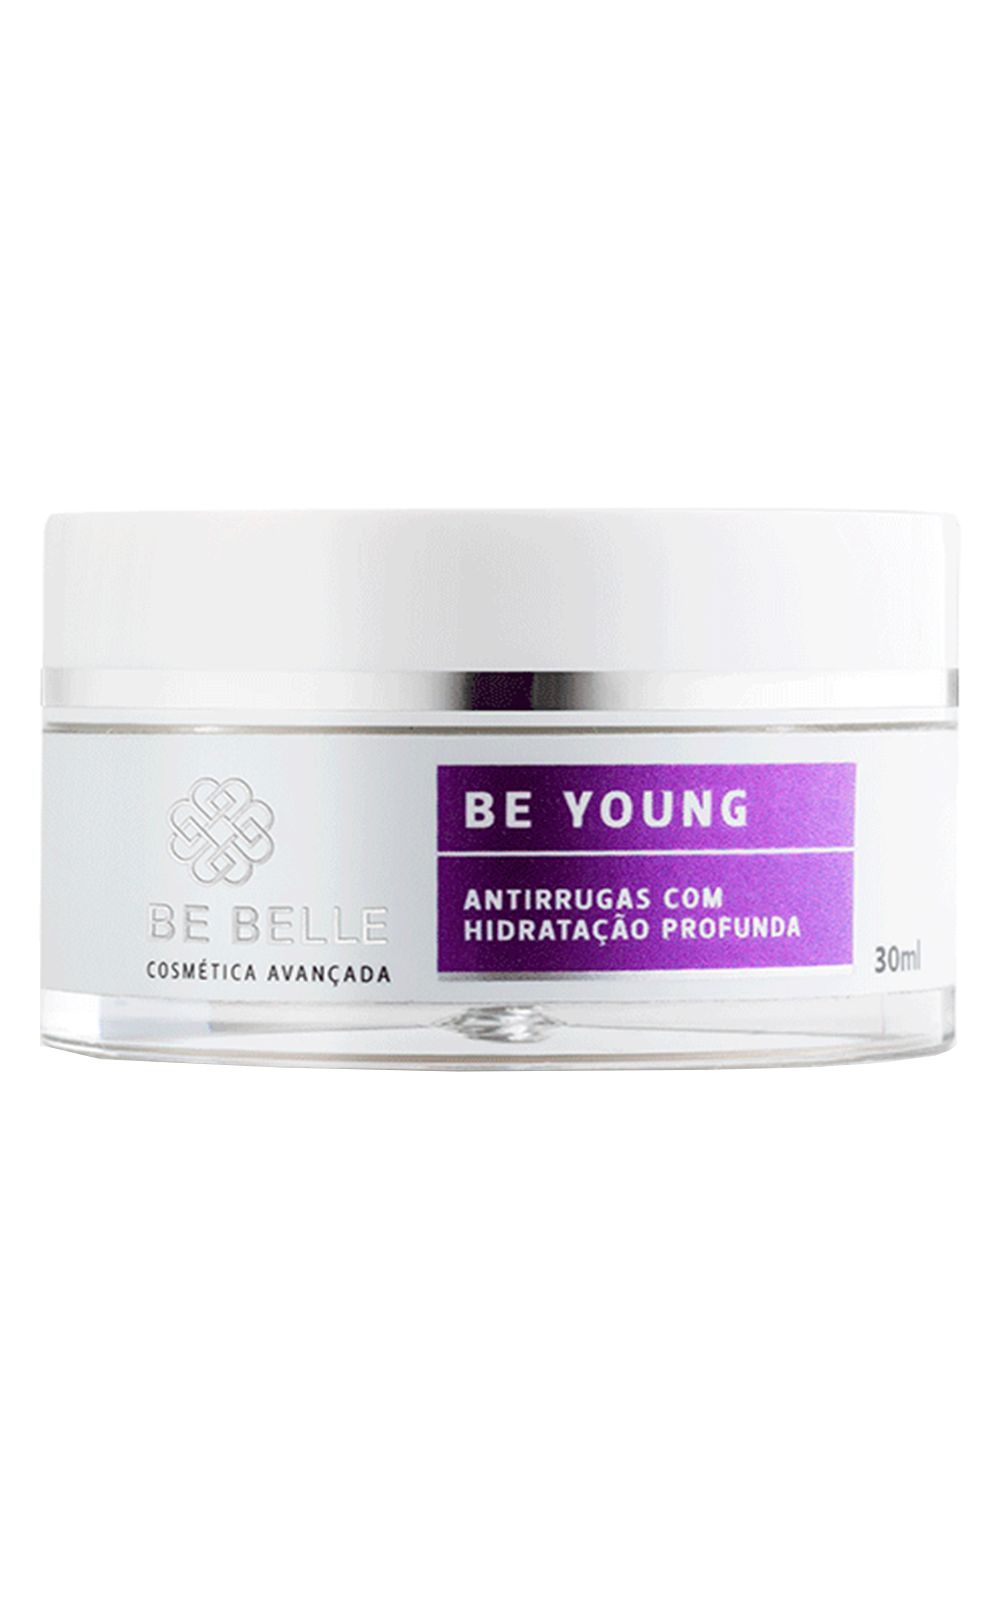 Antirrugas Be Belle - Be Young - 30ml